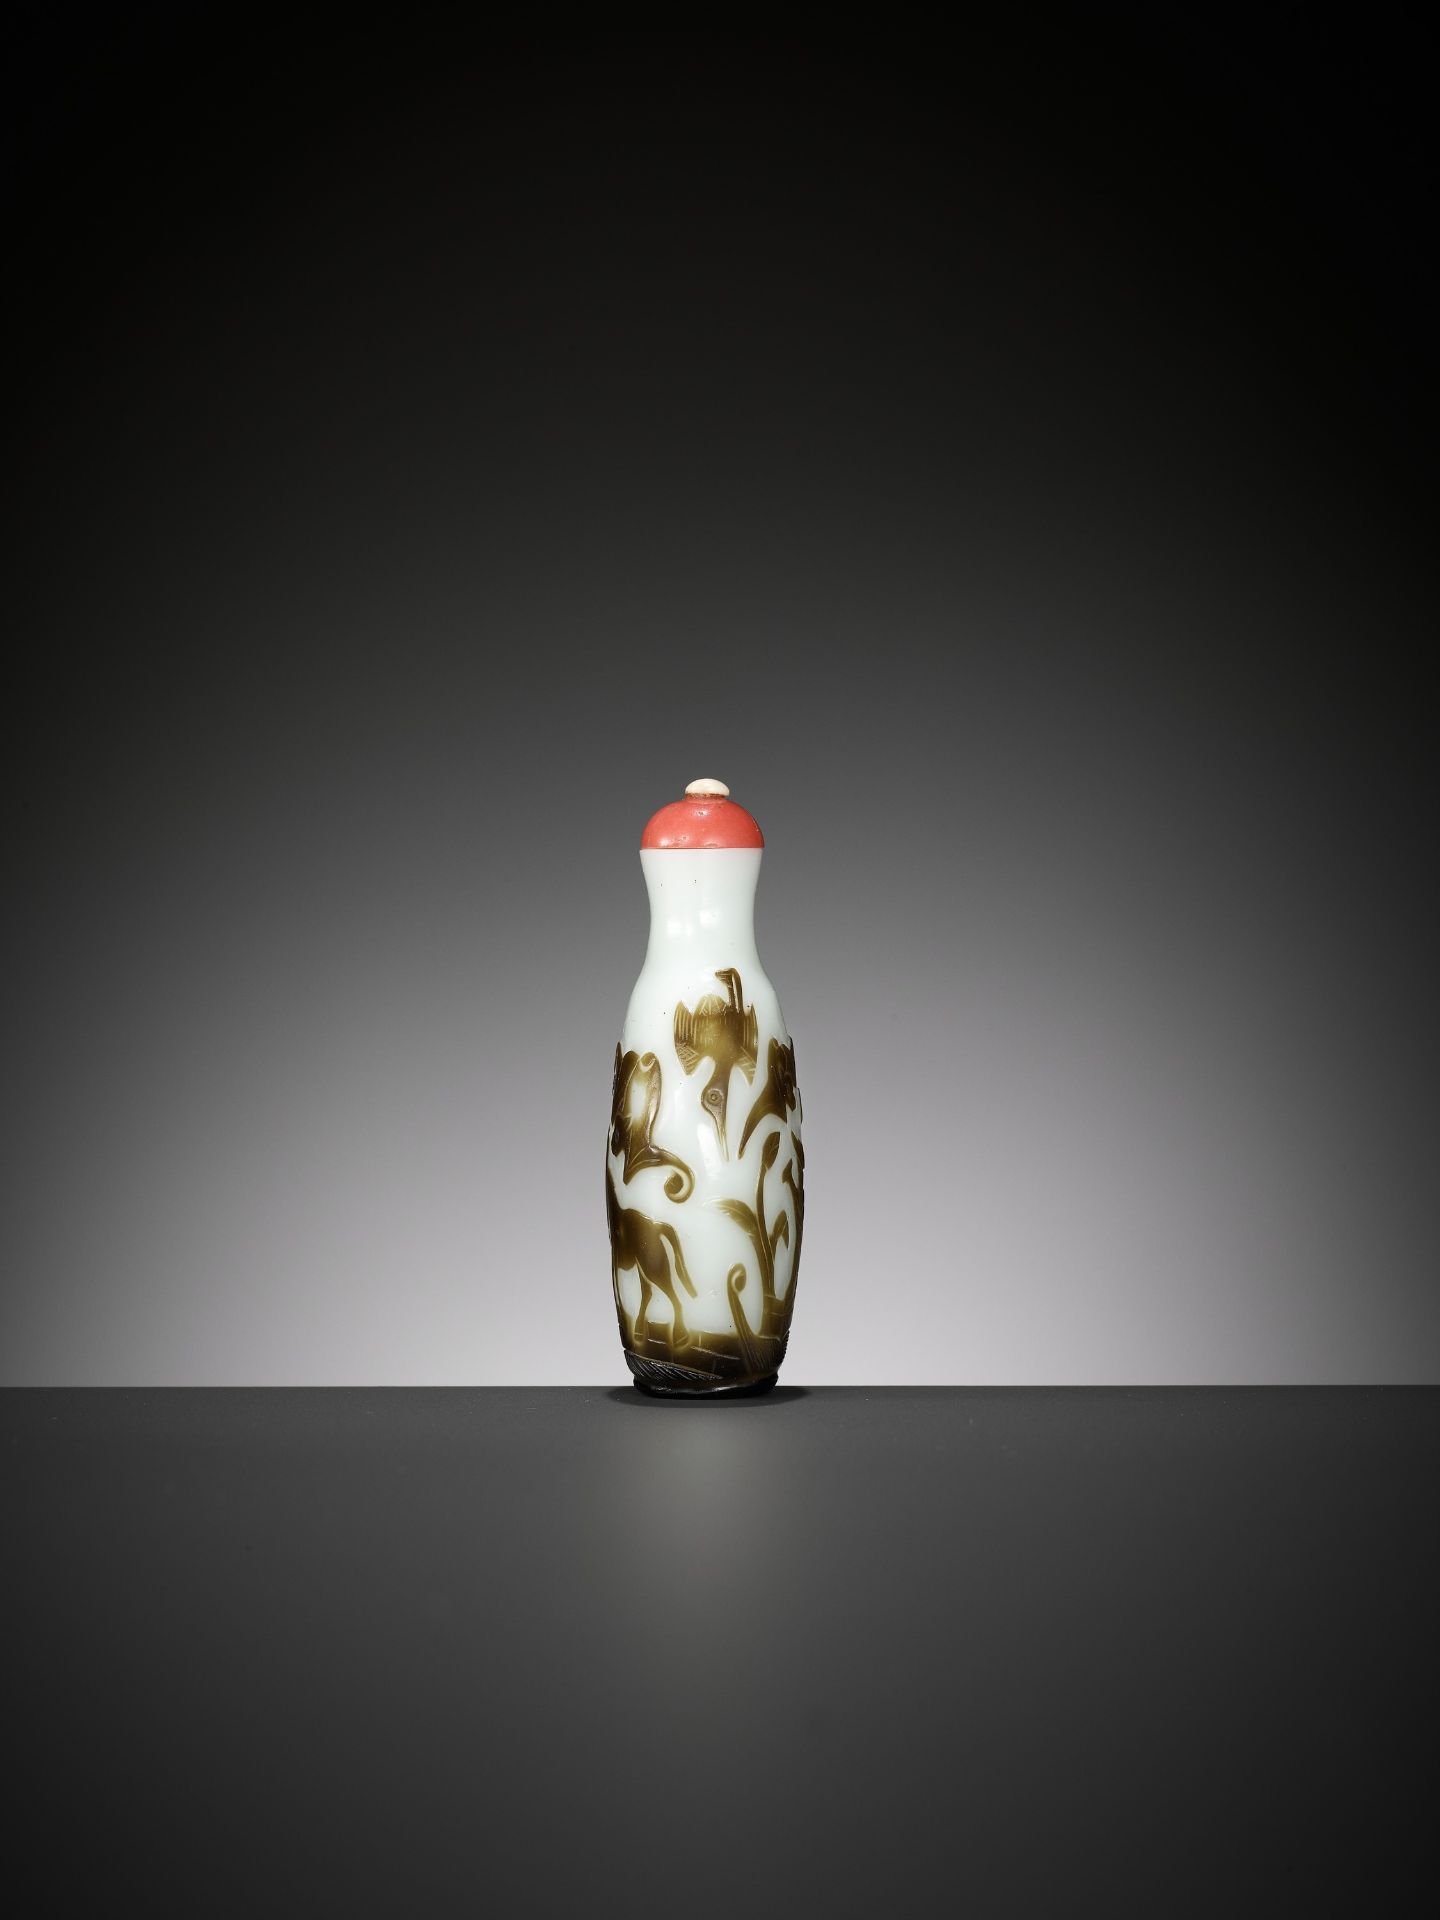 A YANGZHOU OLIVE-BROWN OVERLAY GLASS SNUFF BOTTLE, 1820-1860 - Image 5 of 7